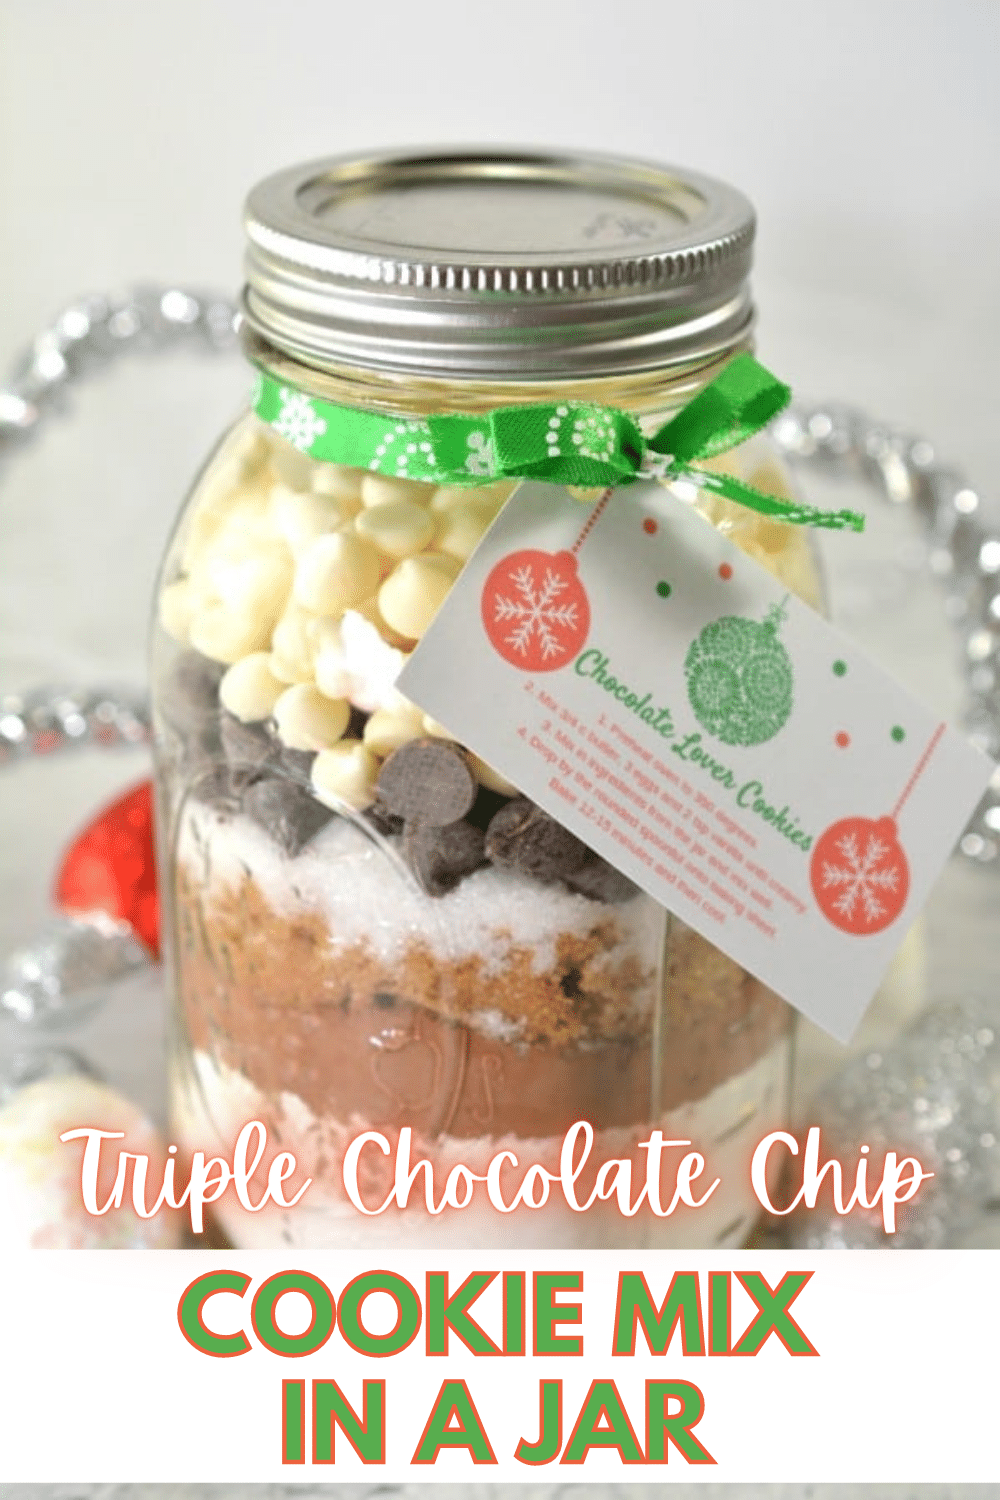 This delicious cookie mix in a jar gift is perfect for chocolate lovers! Comes with free printable tags to attach to the jar with instructions for the recipient to turn the mix into delicious triple chocolate cookies. #giftinajar #chocolate #cookies via @wondermomwannab